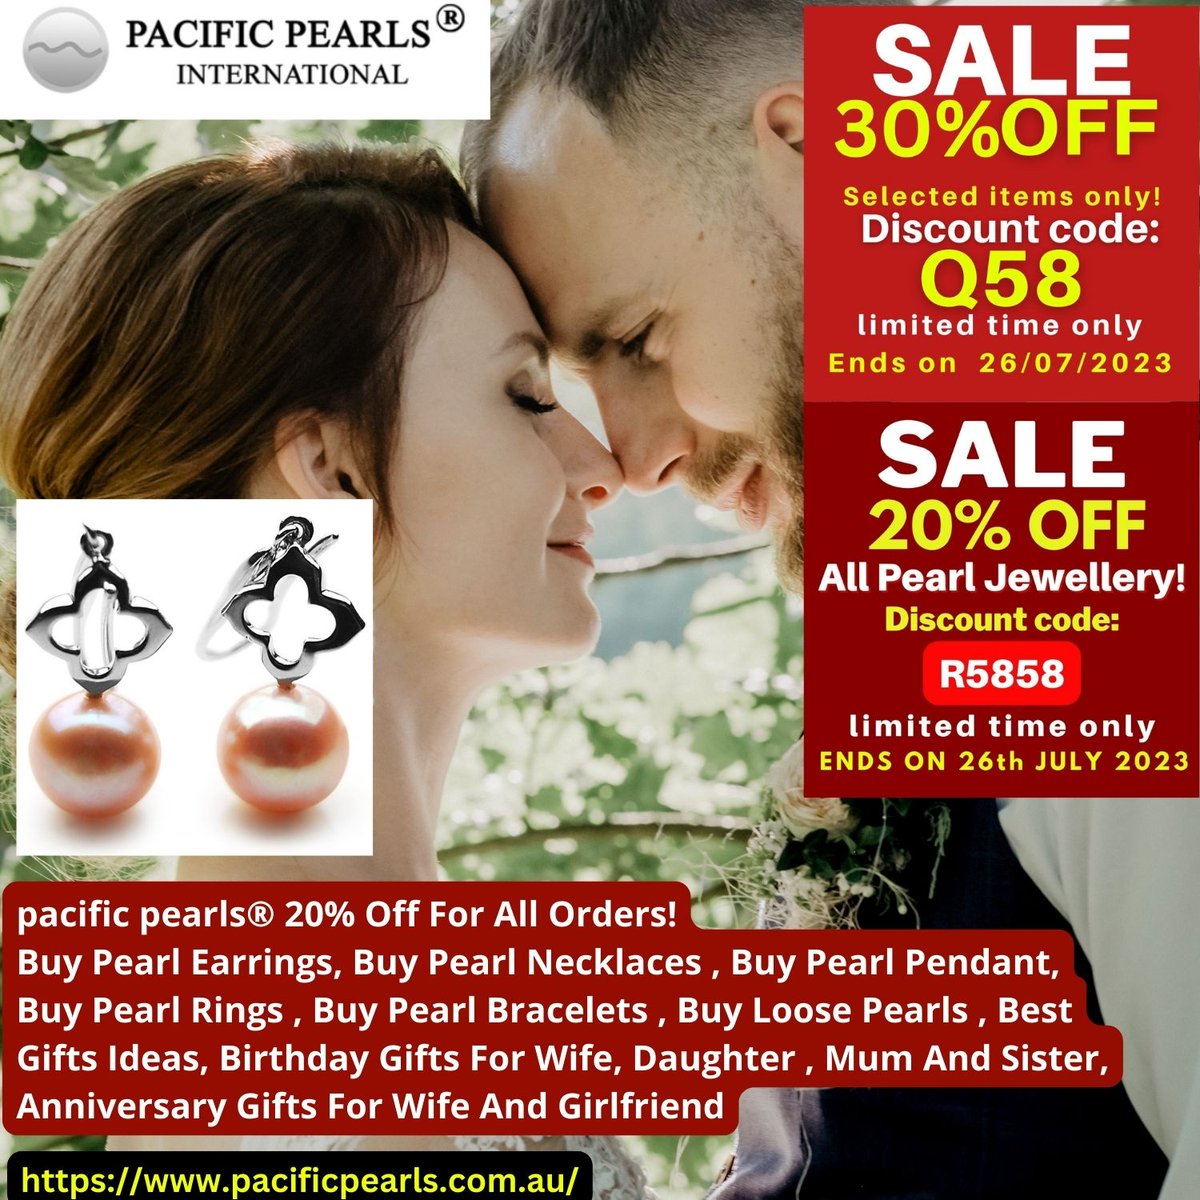 pacific pearls® 30% off selected items Discount Code: Q58 ( limited time only) Ends On 26th July 2023
pacificpearls.com.au/30-off-selecte…
SHOP NOW!
#Onsalenow #pearljewelry #pearlearrings #pearlnecklaces #pearlpendants #loosepearls #pearlbracelets #pearlrings #anniversarygifts #giftsforwife